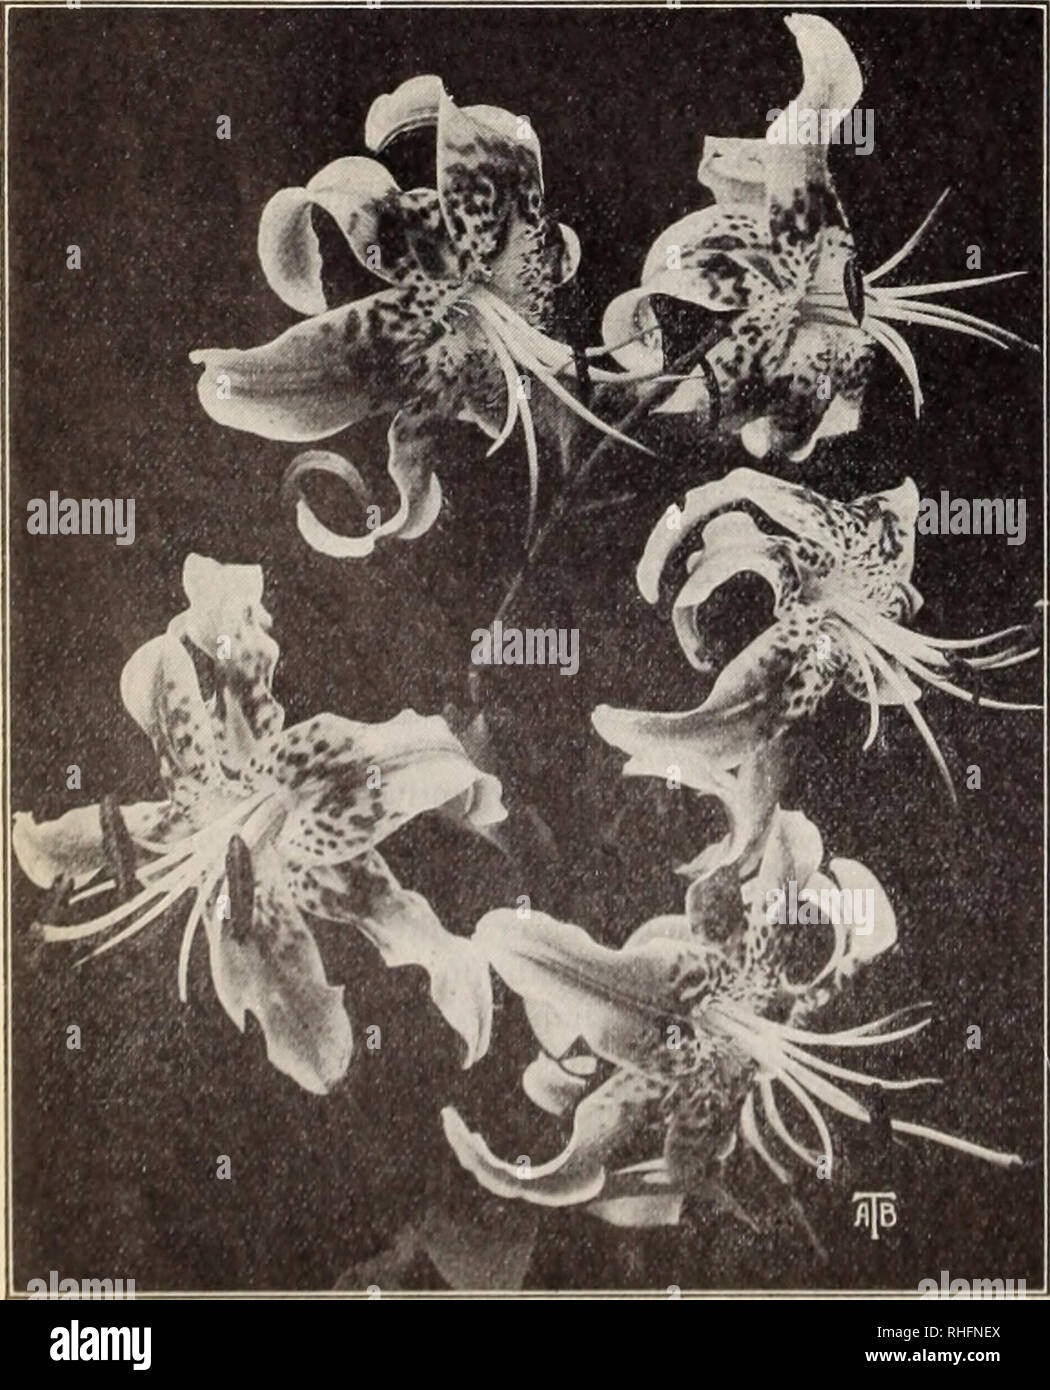 . Boddington's quality bulbs, seeds and plants / Arthur T. Boddington.. Nursery Catalogue. Lilium auratum (type. Lilium apecioBum (type; RARE LILIUM AURATUMS LILIUM AURATUM PICTUM. A very choice Each Do^. 100 type of Lilium am alum; pure white with red and yellow bands through each petal. Large bulbs $0 30 $3 00 $20 00 LILIUM AURATUM PLATYPHYLLUM. Flowers of inunense size, pure ivory-white, with a deep golden band tlirough each petal. Large bulbs 40 3 50 25 00 LILIUM AURATUM RUBRUM VITTATUM. A unique variety; flowers 10 to 12 inches across, ivory-white, with broad crimson stripe through center Stock Photo